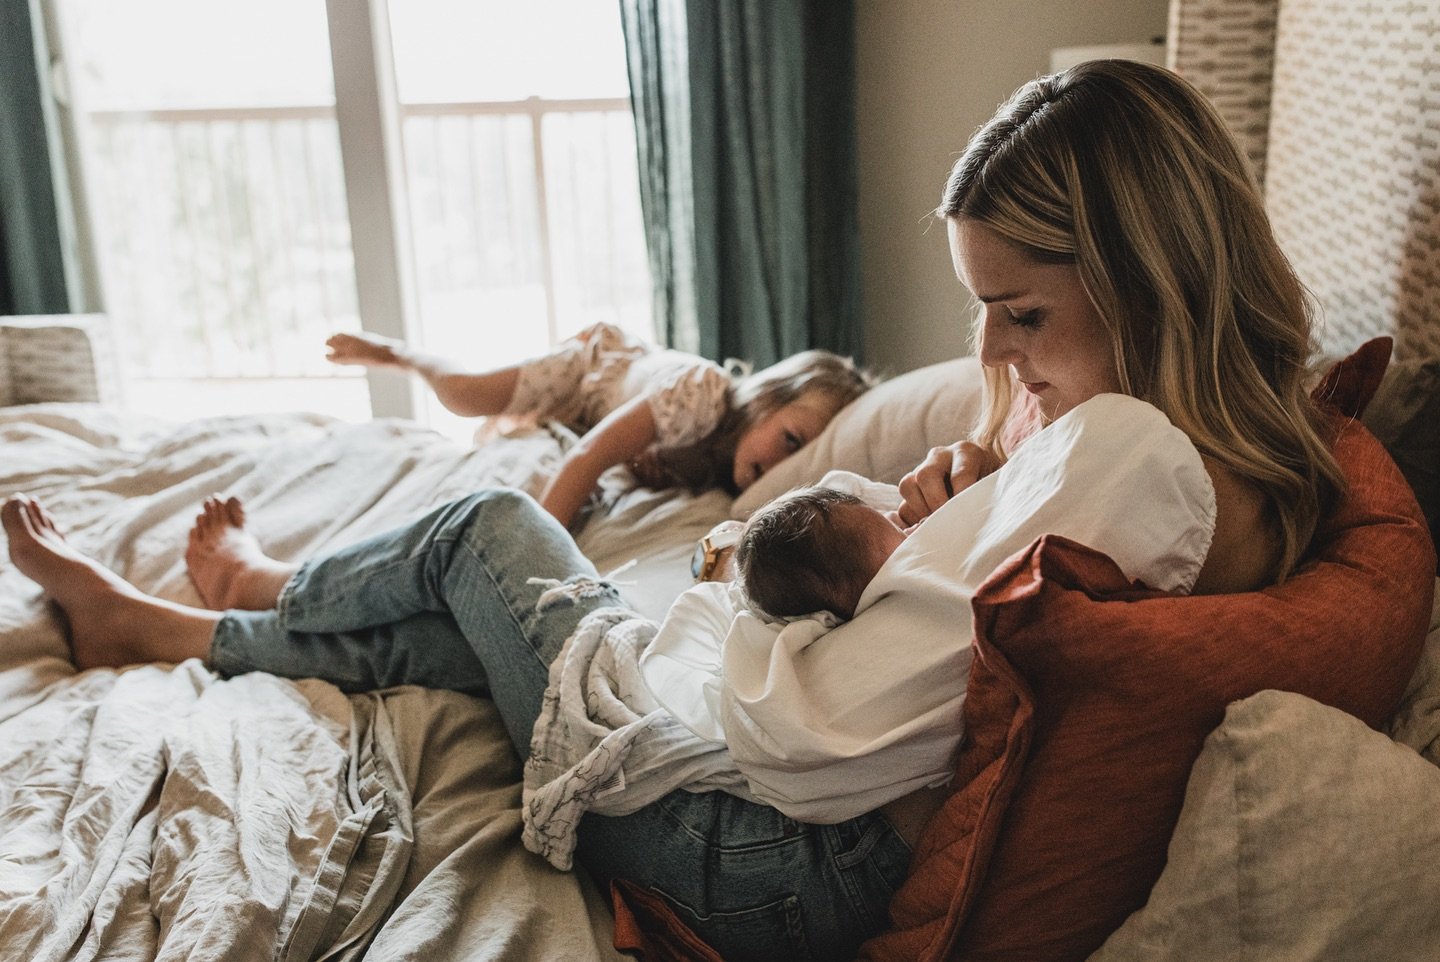 This will forever be one of my favorite photos.

Not because it is perfect, but because it feels right.

A mother nursing her baby while another child plays in the room.

The backlighting is creating a glow.

The warm and cool tones are balanced.

It